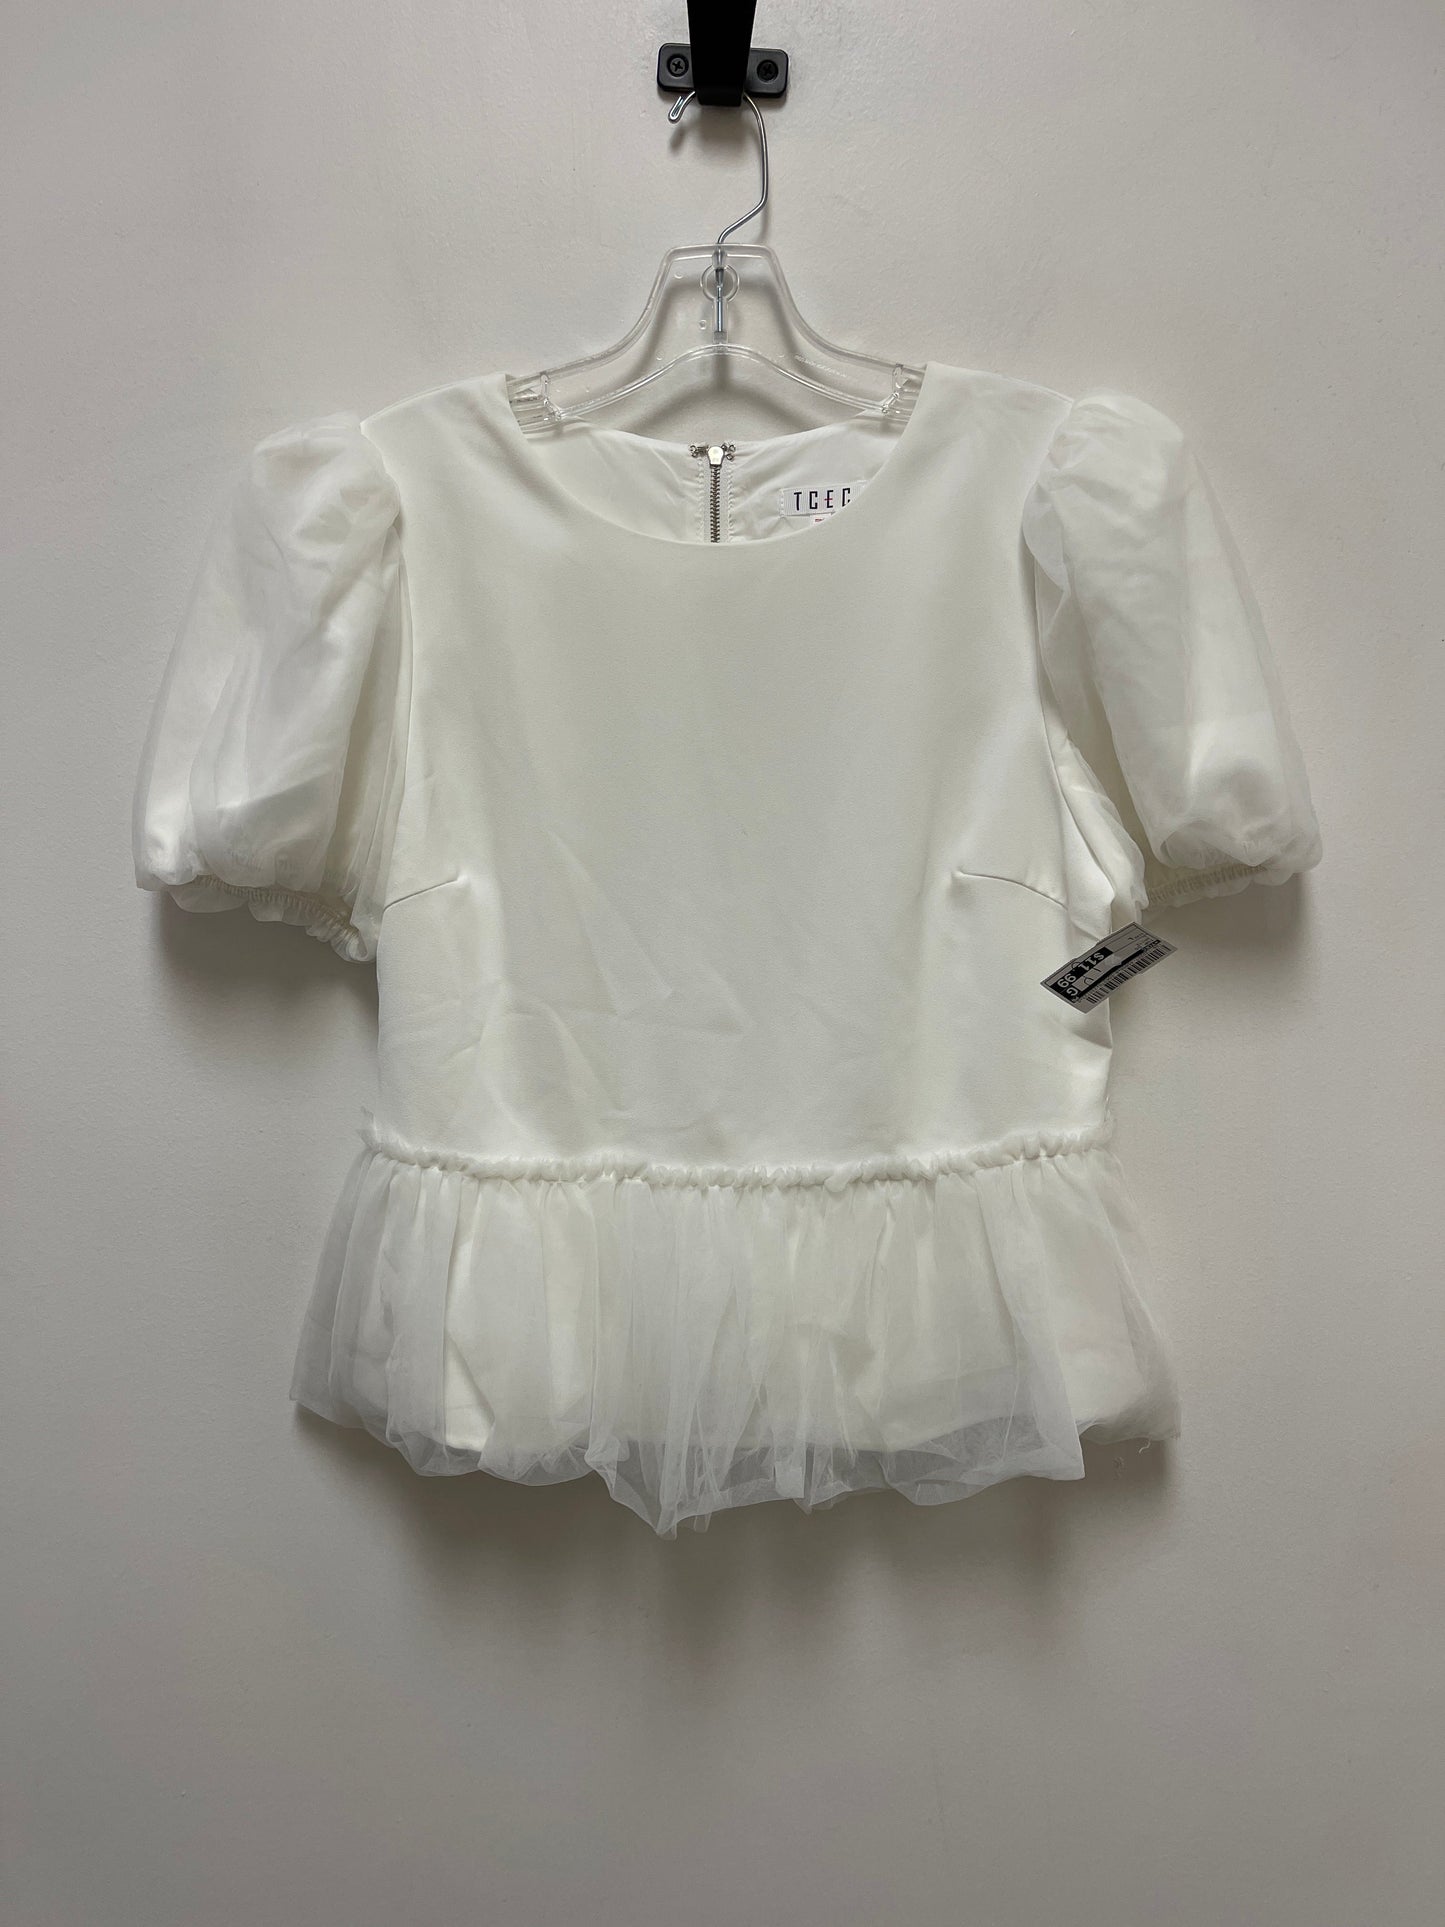 White Top Short Sleeve Tcec, Size L